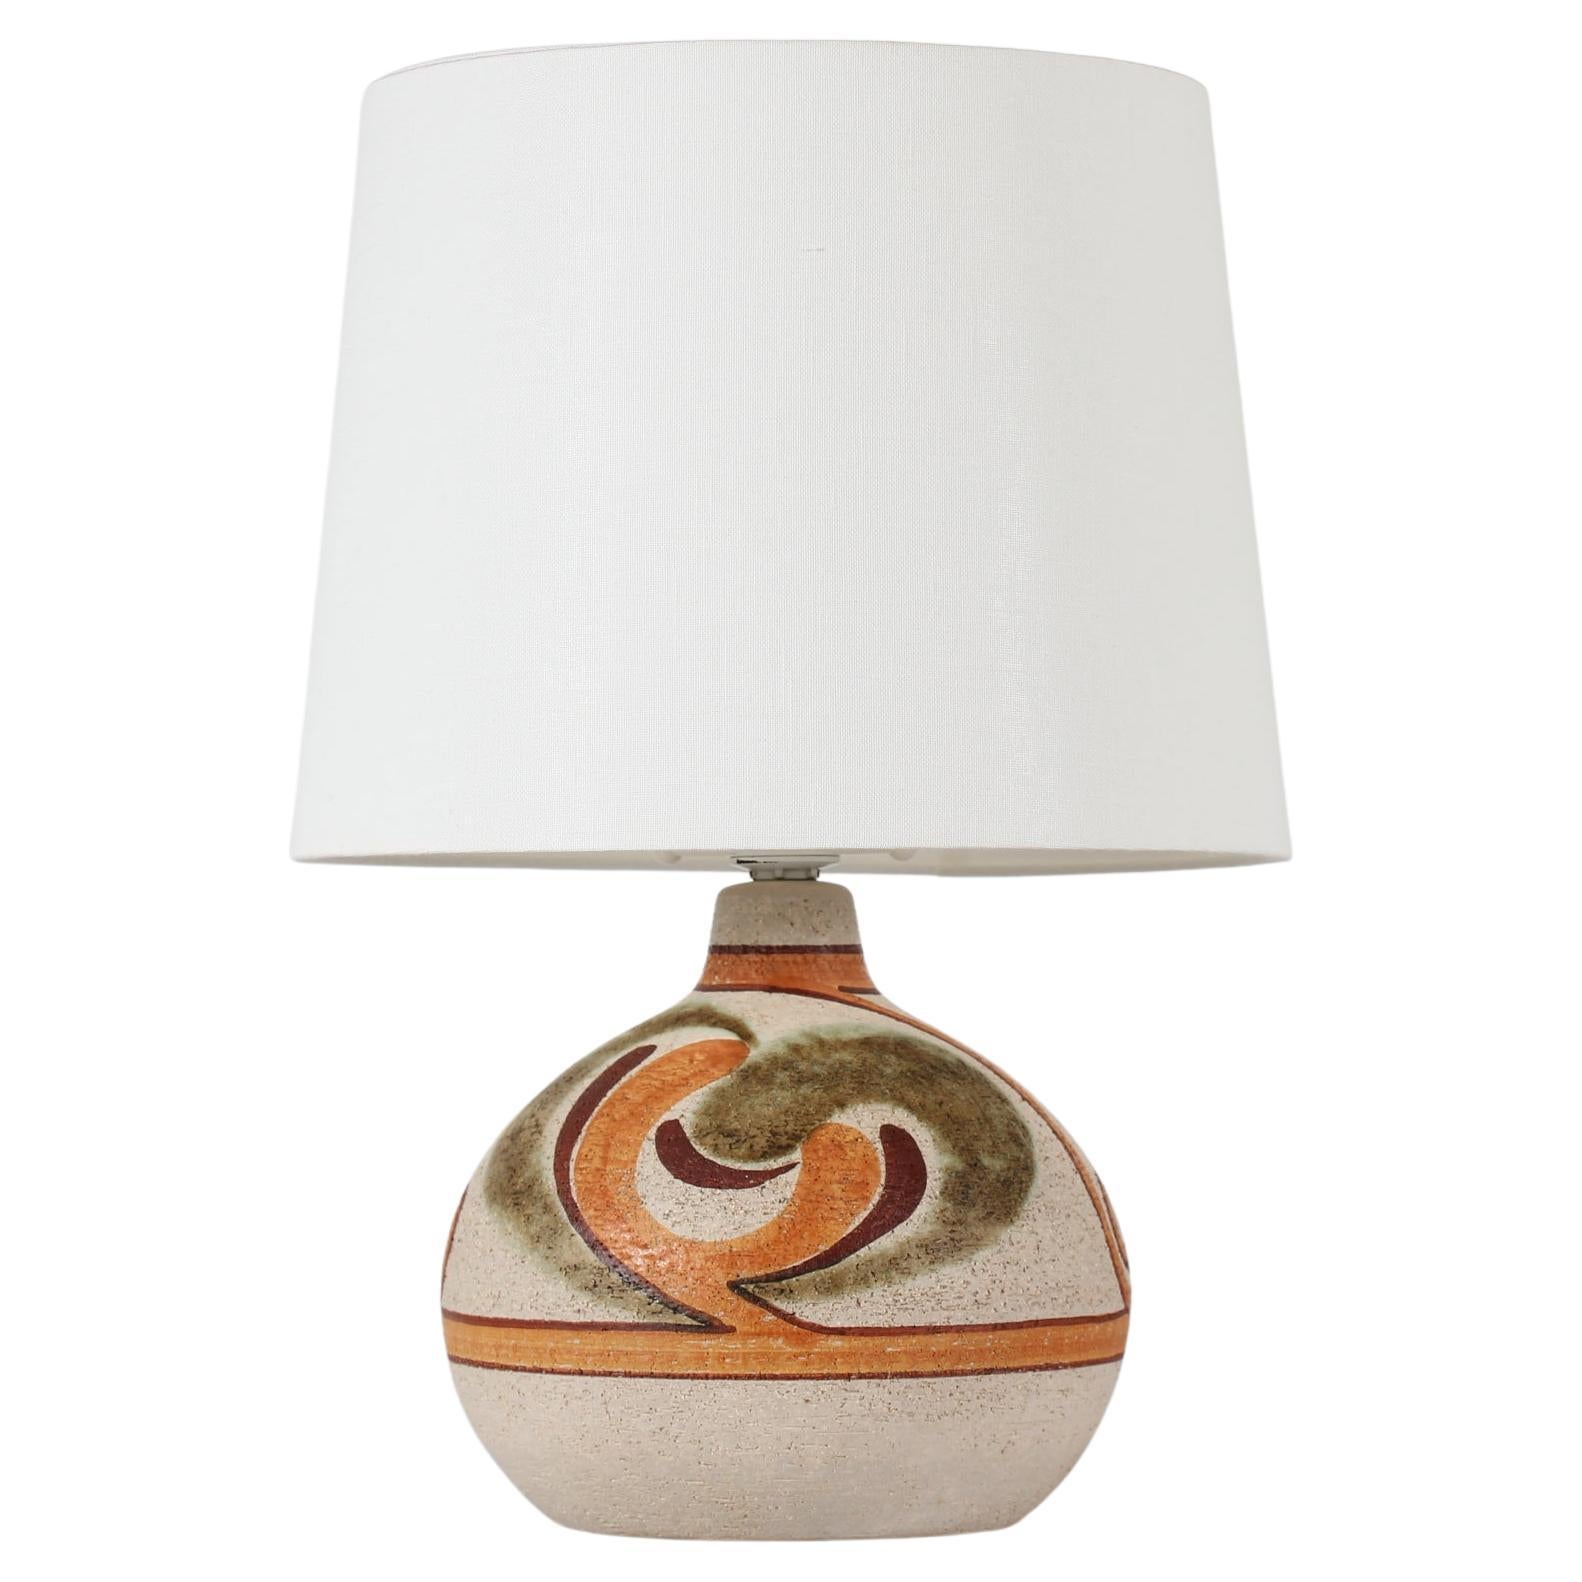 Eva and Johannes Andersen Tall Ceramic Table Lamp with New Shade ...